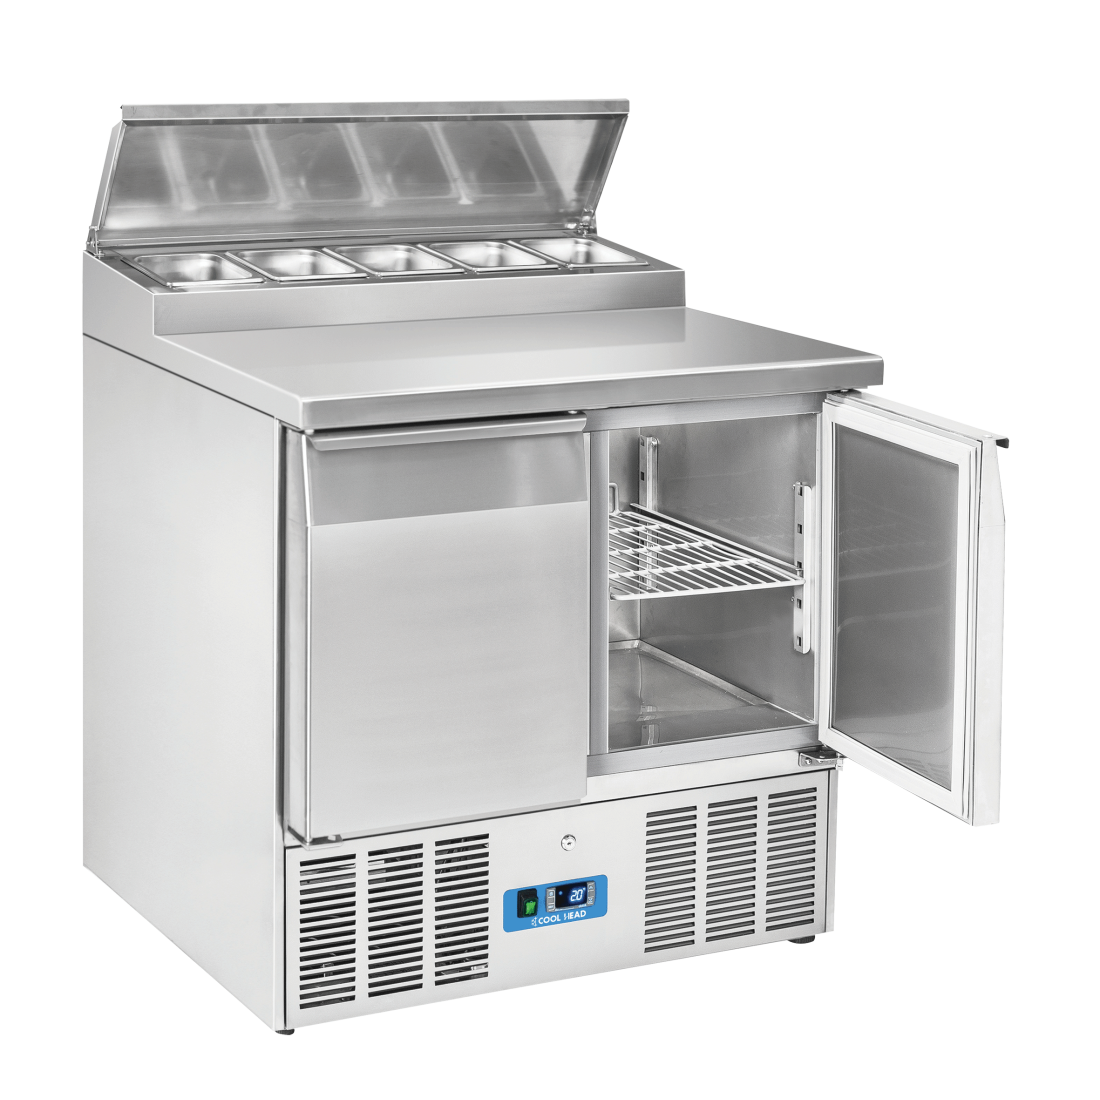 COOL HEAD ,CRS90A, Pizza & Sandwiches Preparation Chiller With Two Doors And Steel Worktop - Depth 70 cm